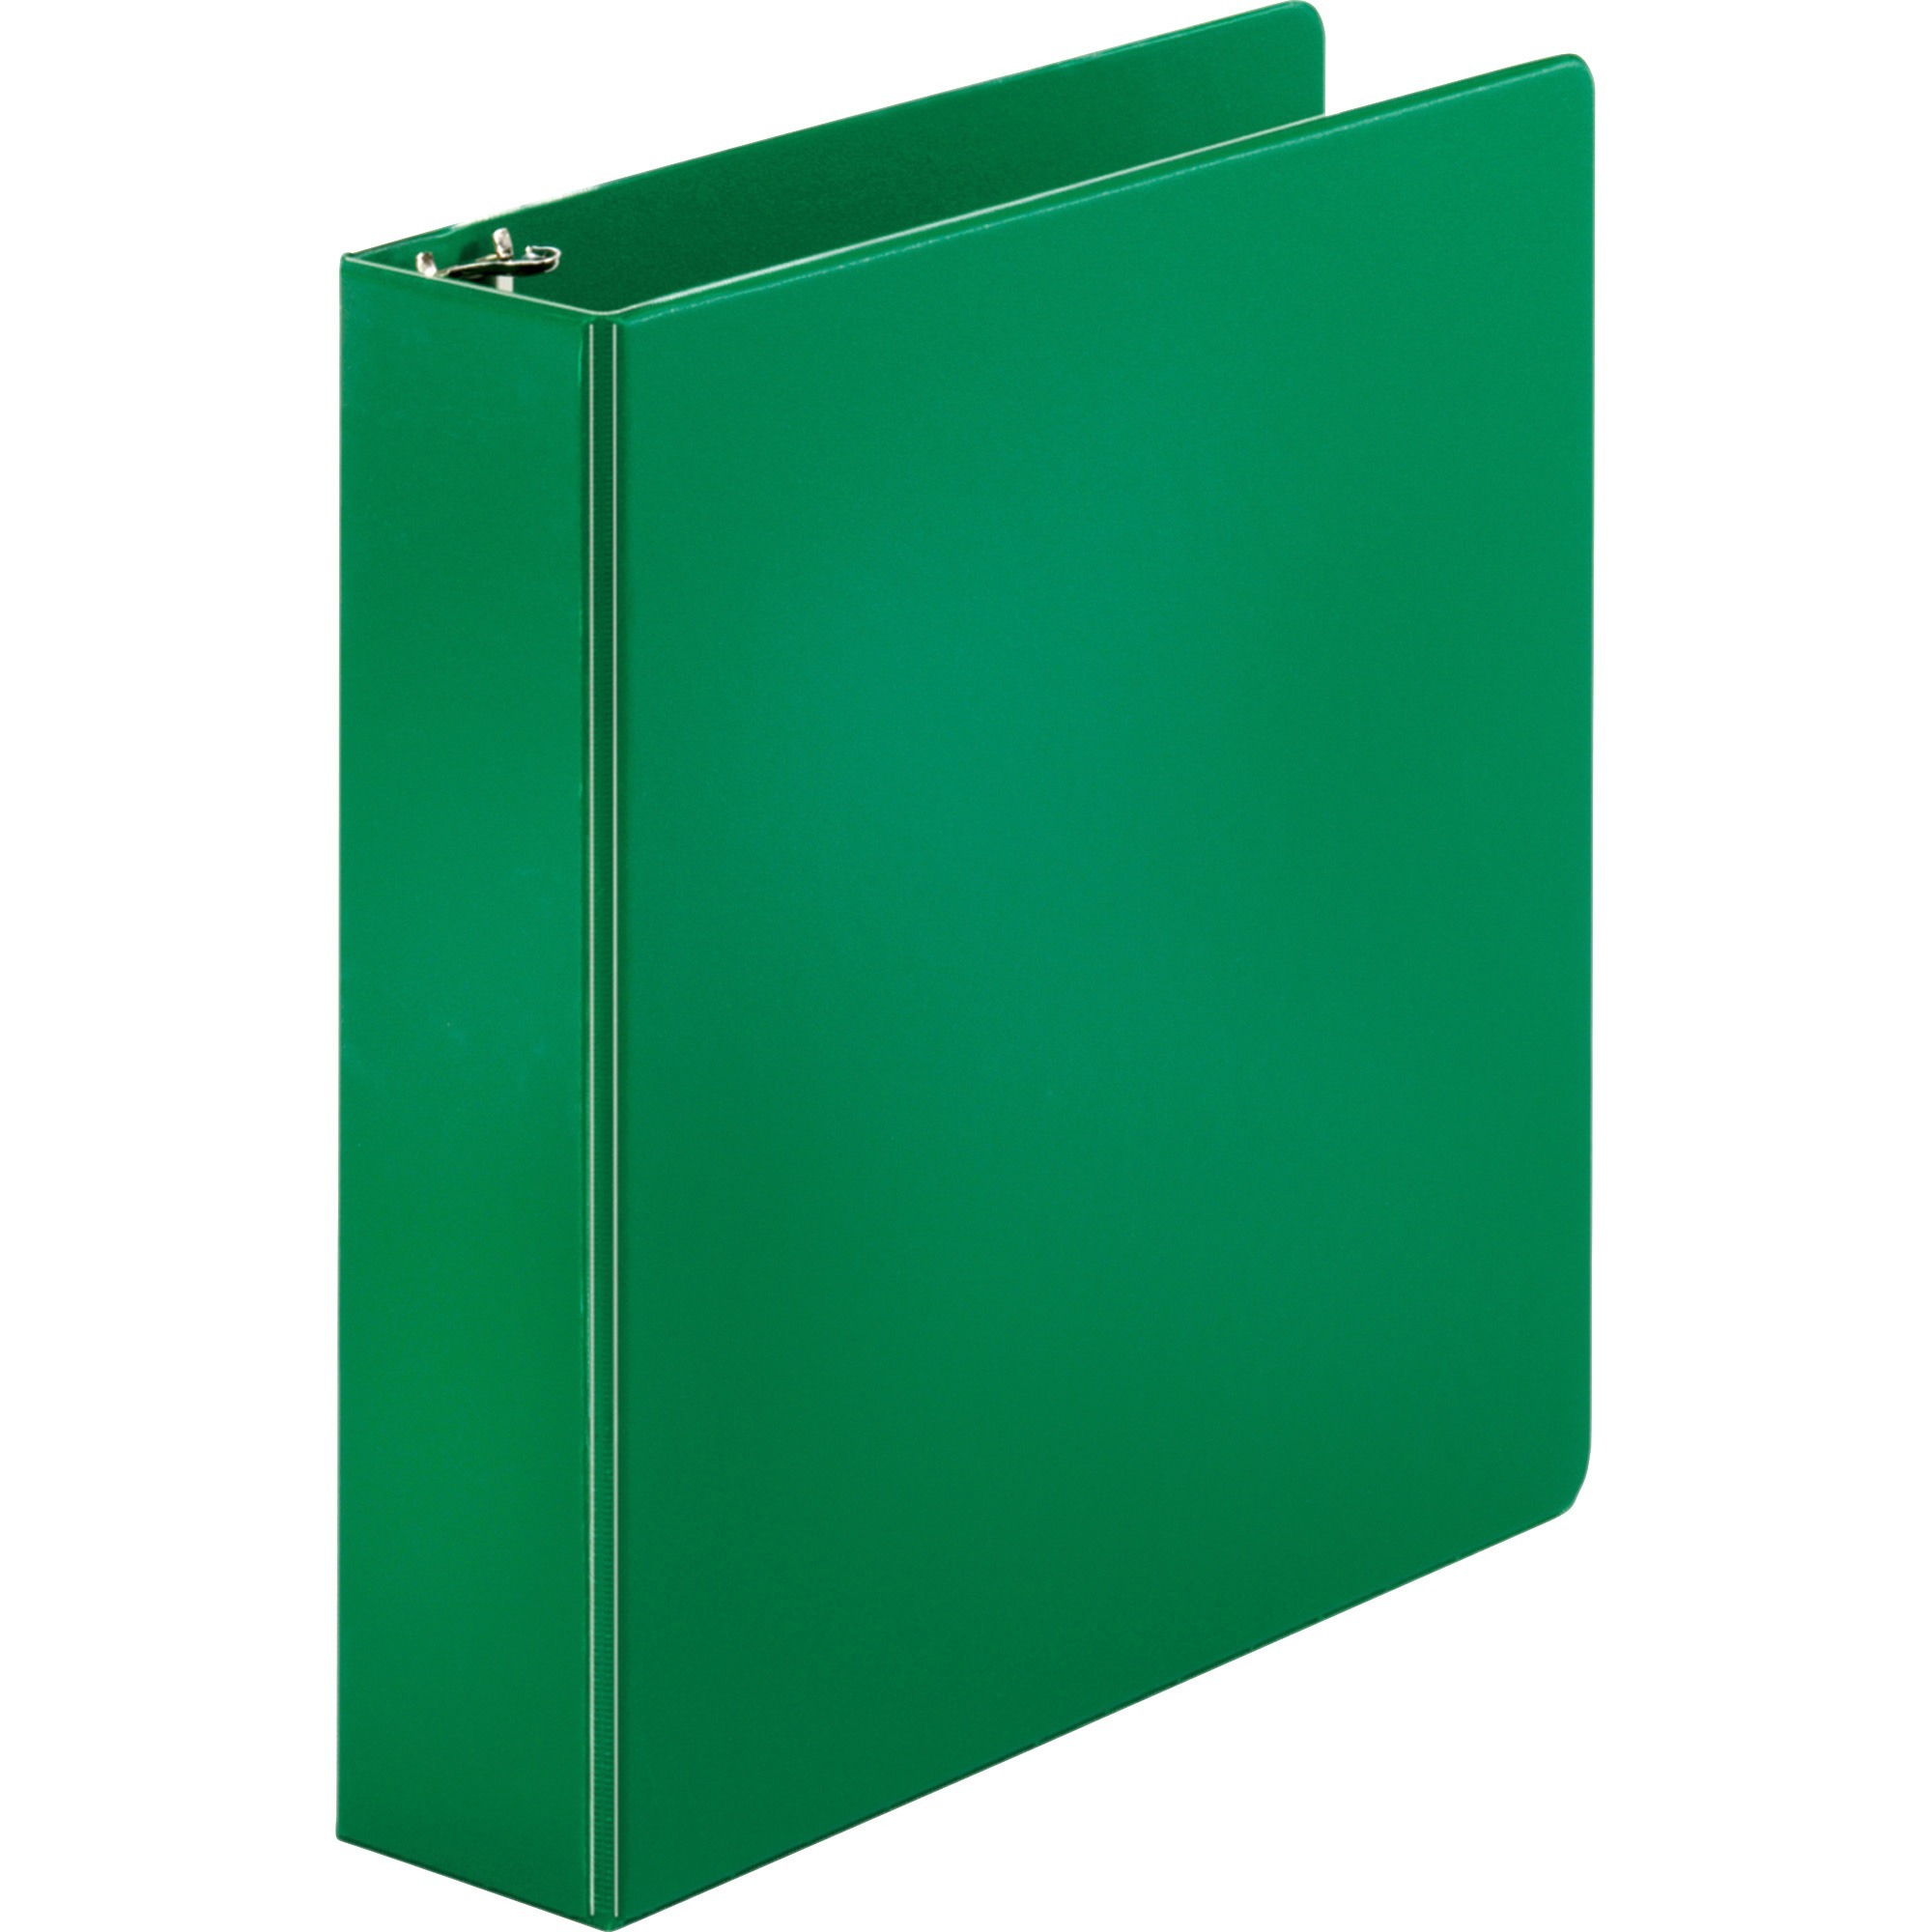 Glennco Office Products Ltd. :: Office Supplies :: Binders 